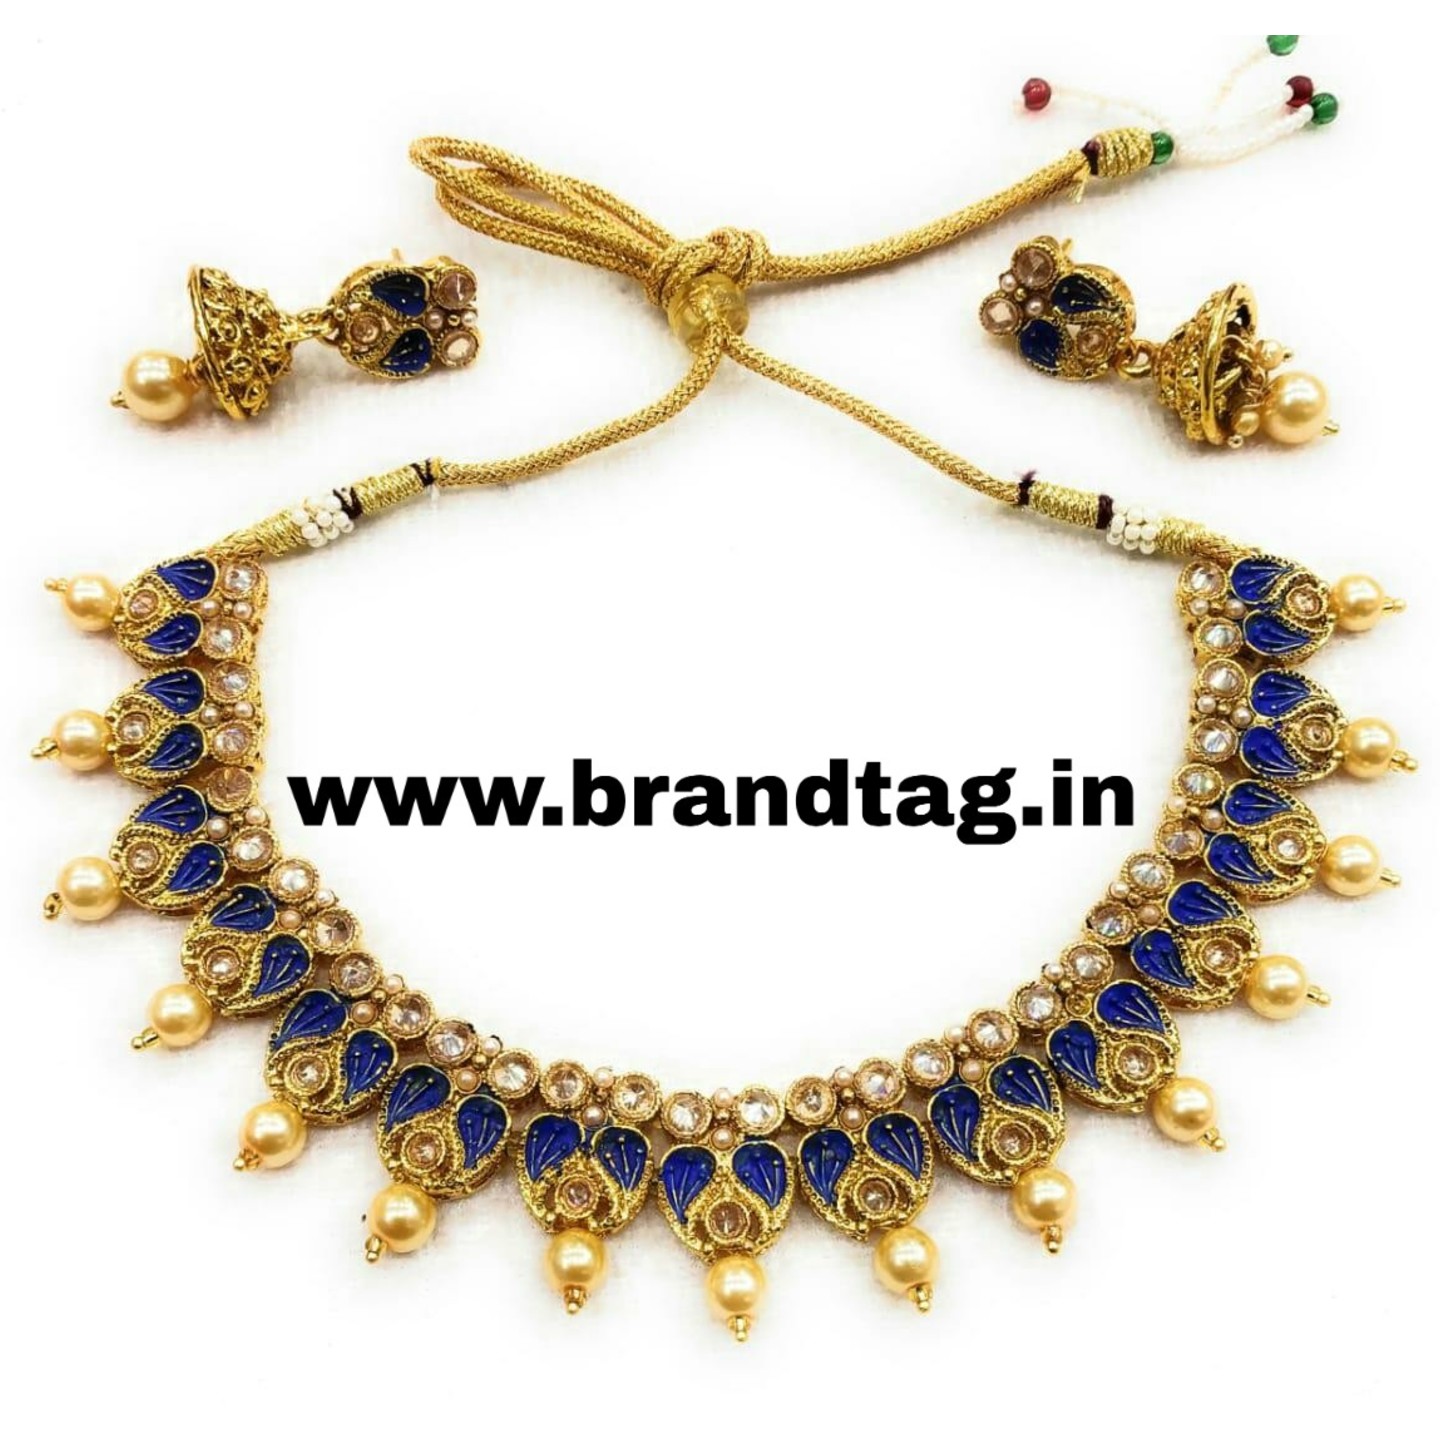 BrandTag's Inayaa Necklace set for women !